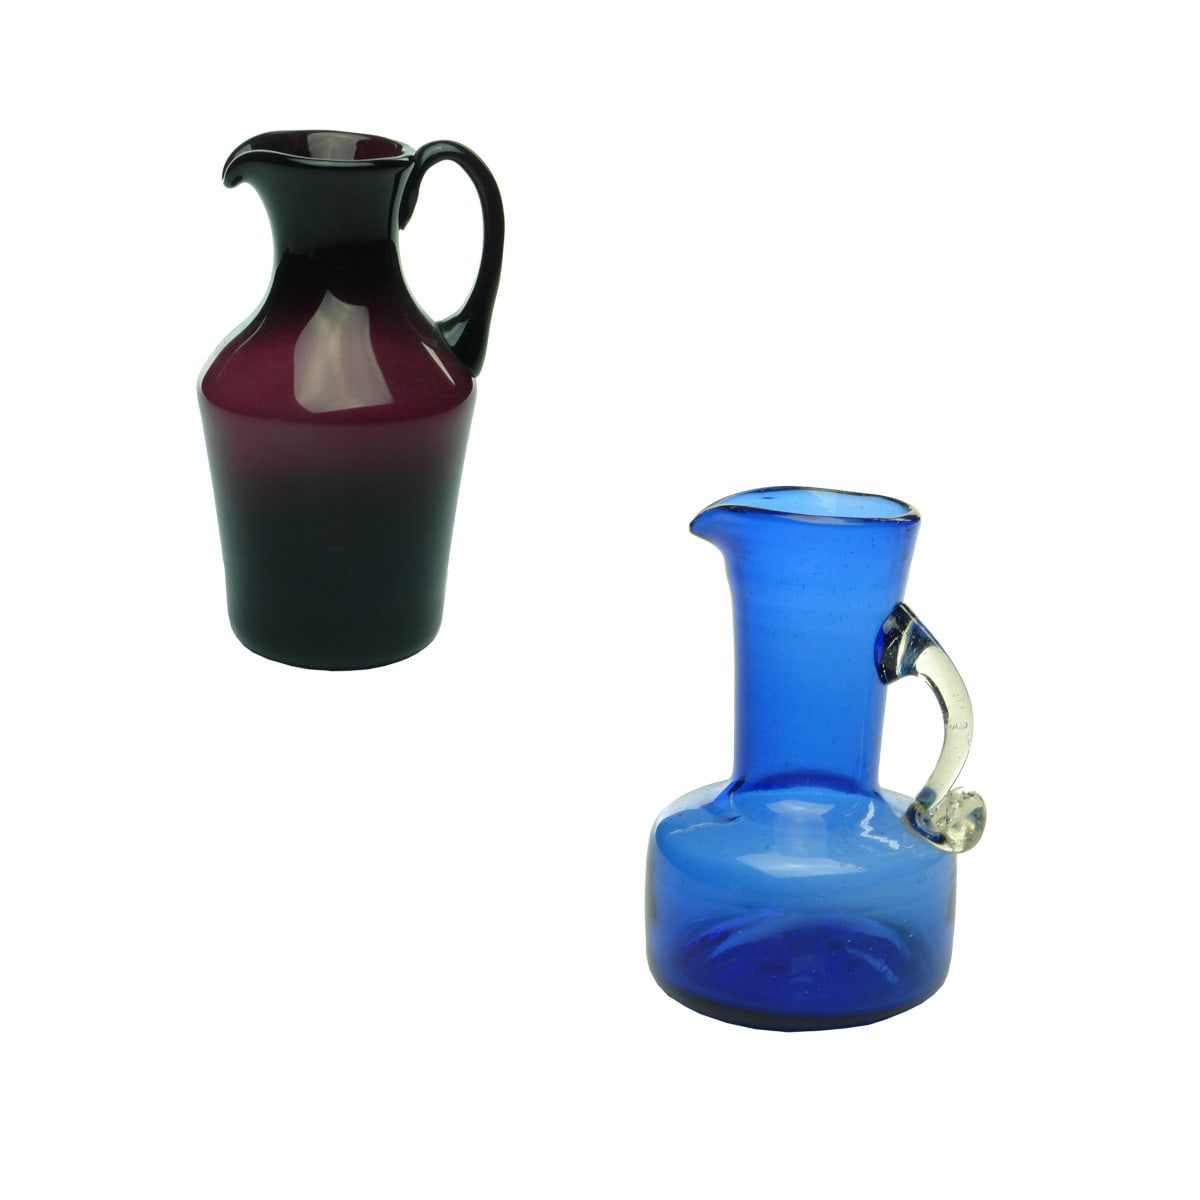 Early Glass. Two Jugs. Purple pouring jug with handle and a Blue pouring jug with clear handle. Pontils.